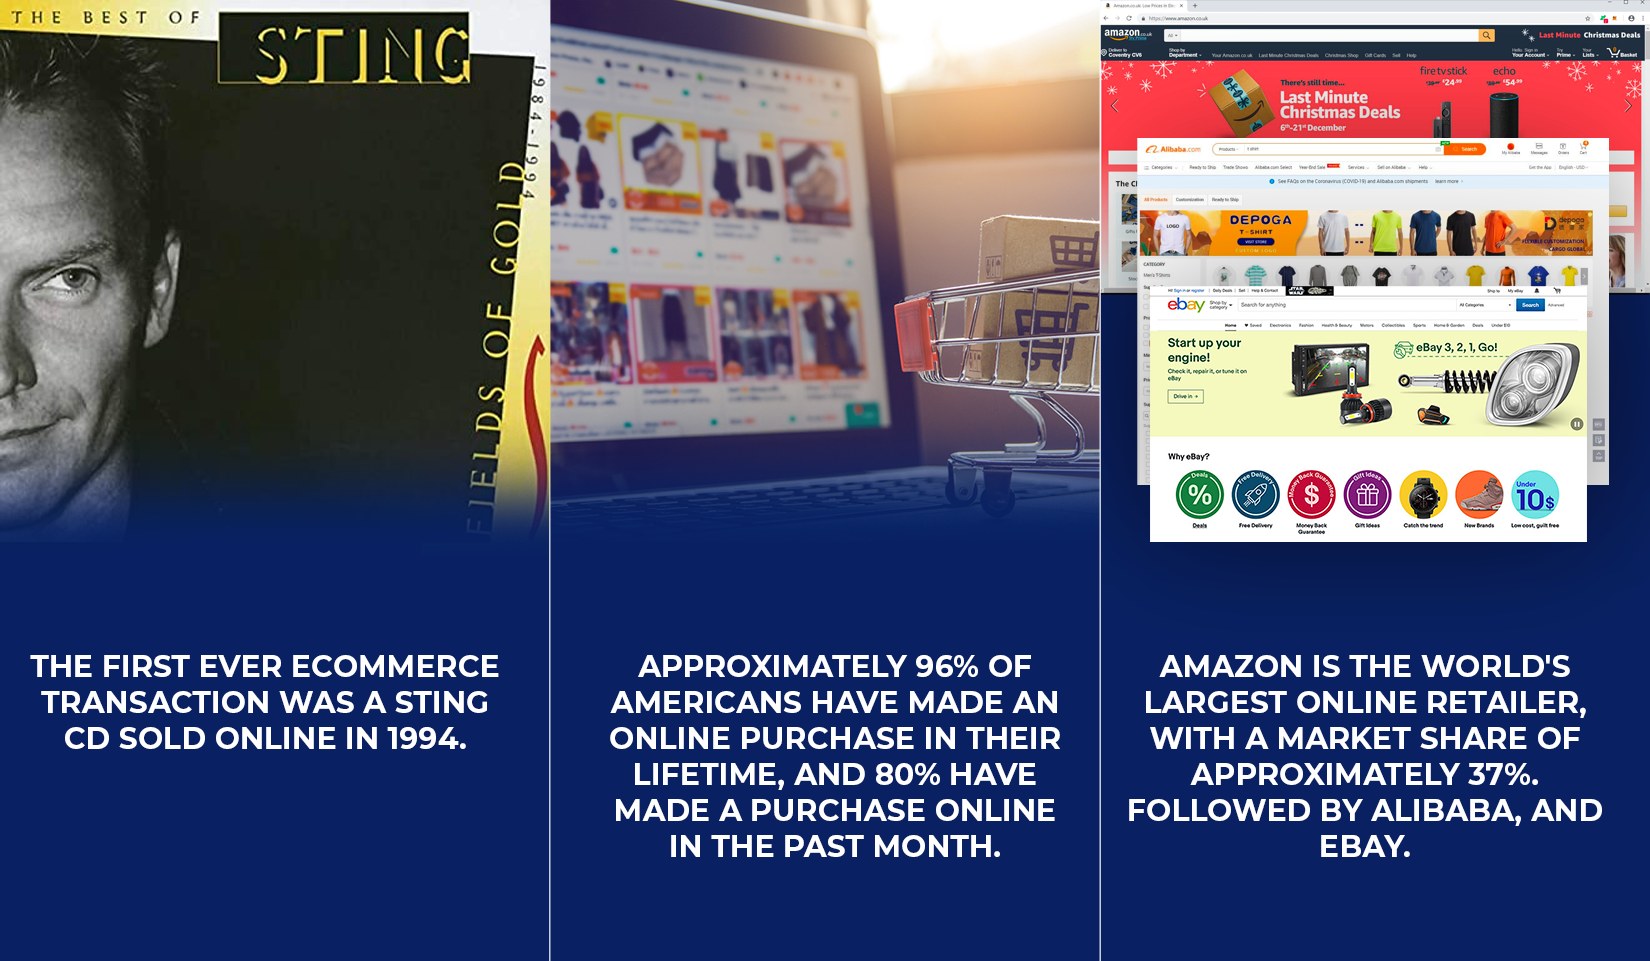 Did you know facts on the retail and eCommerce industry